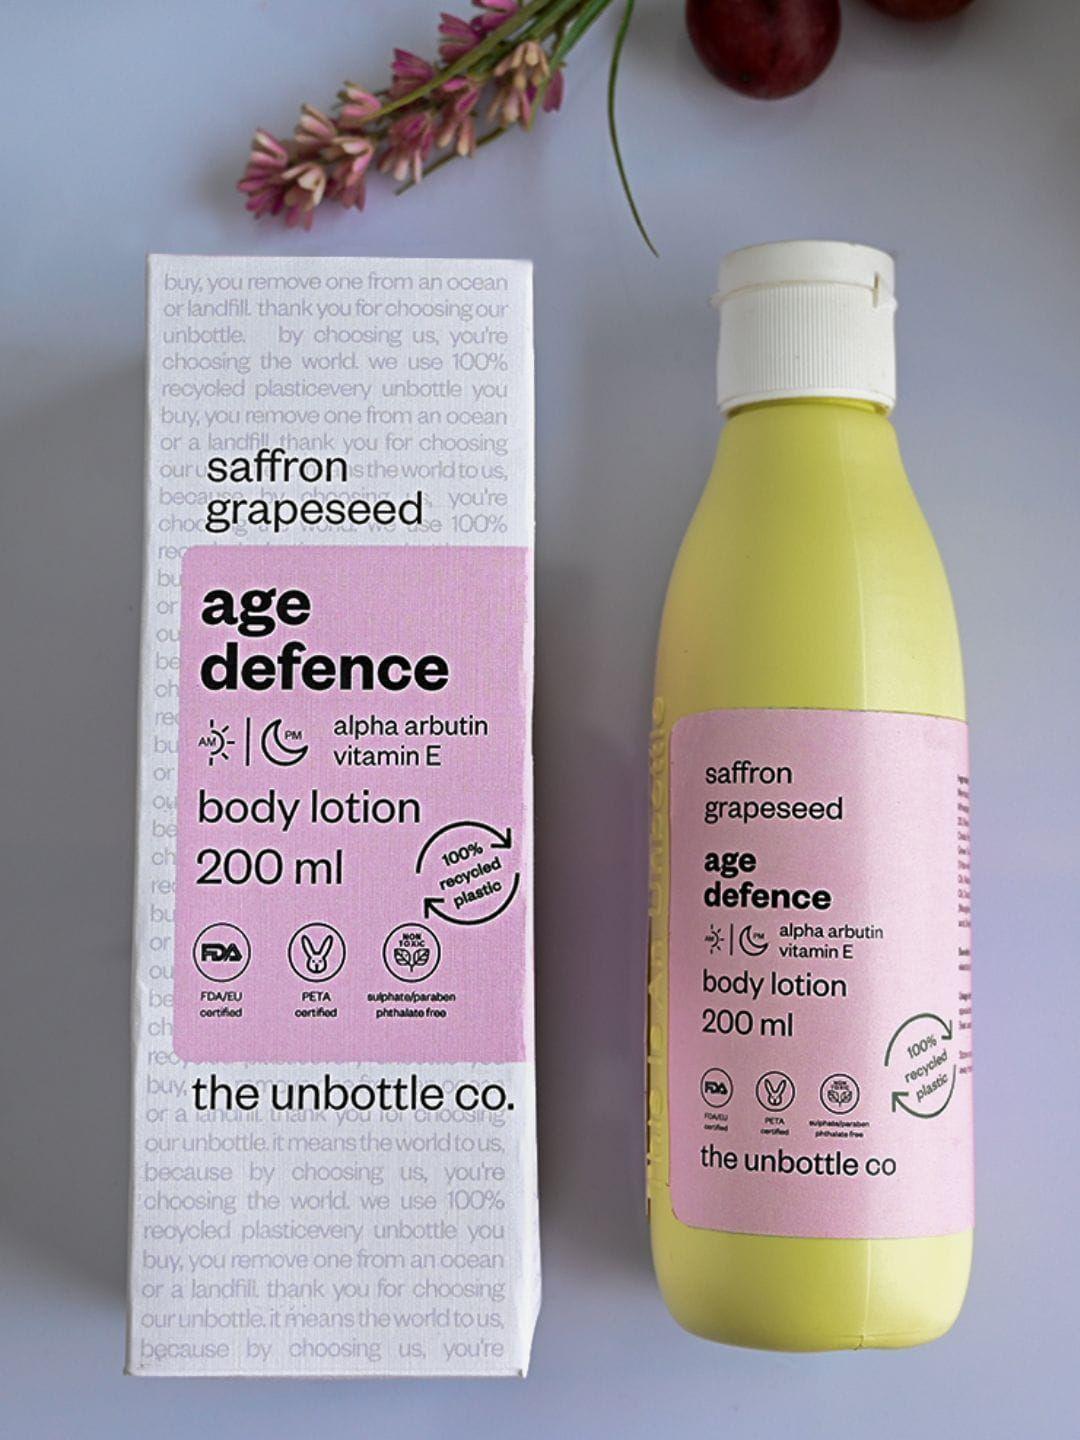 the unbottle co saffron grapeseed age defence body lotion with alpha arbutin - 200 ml